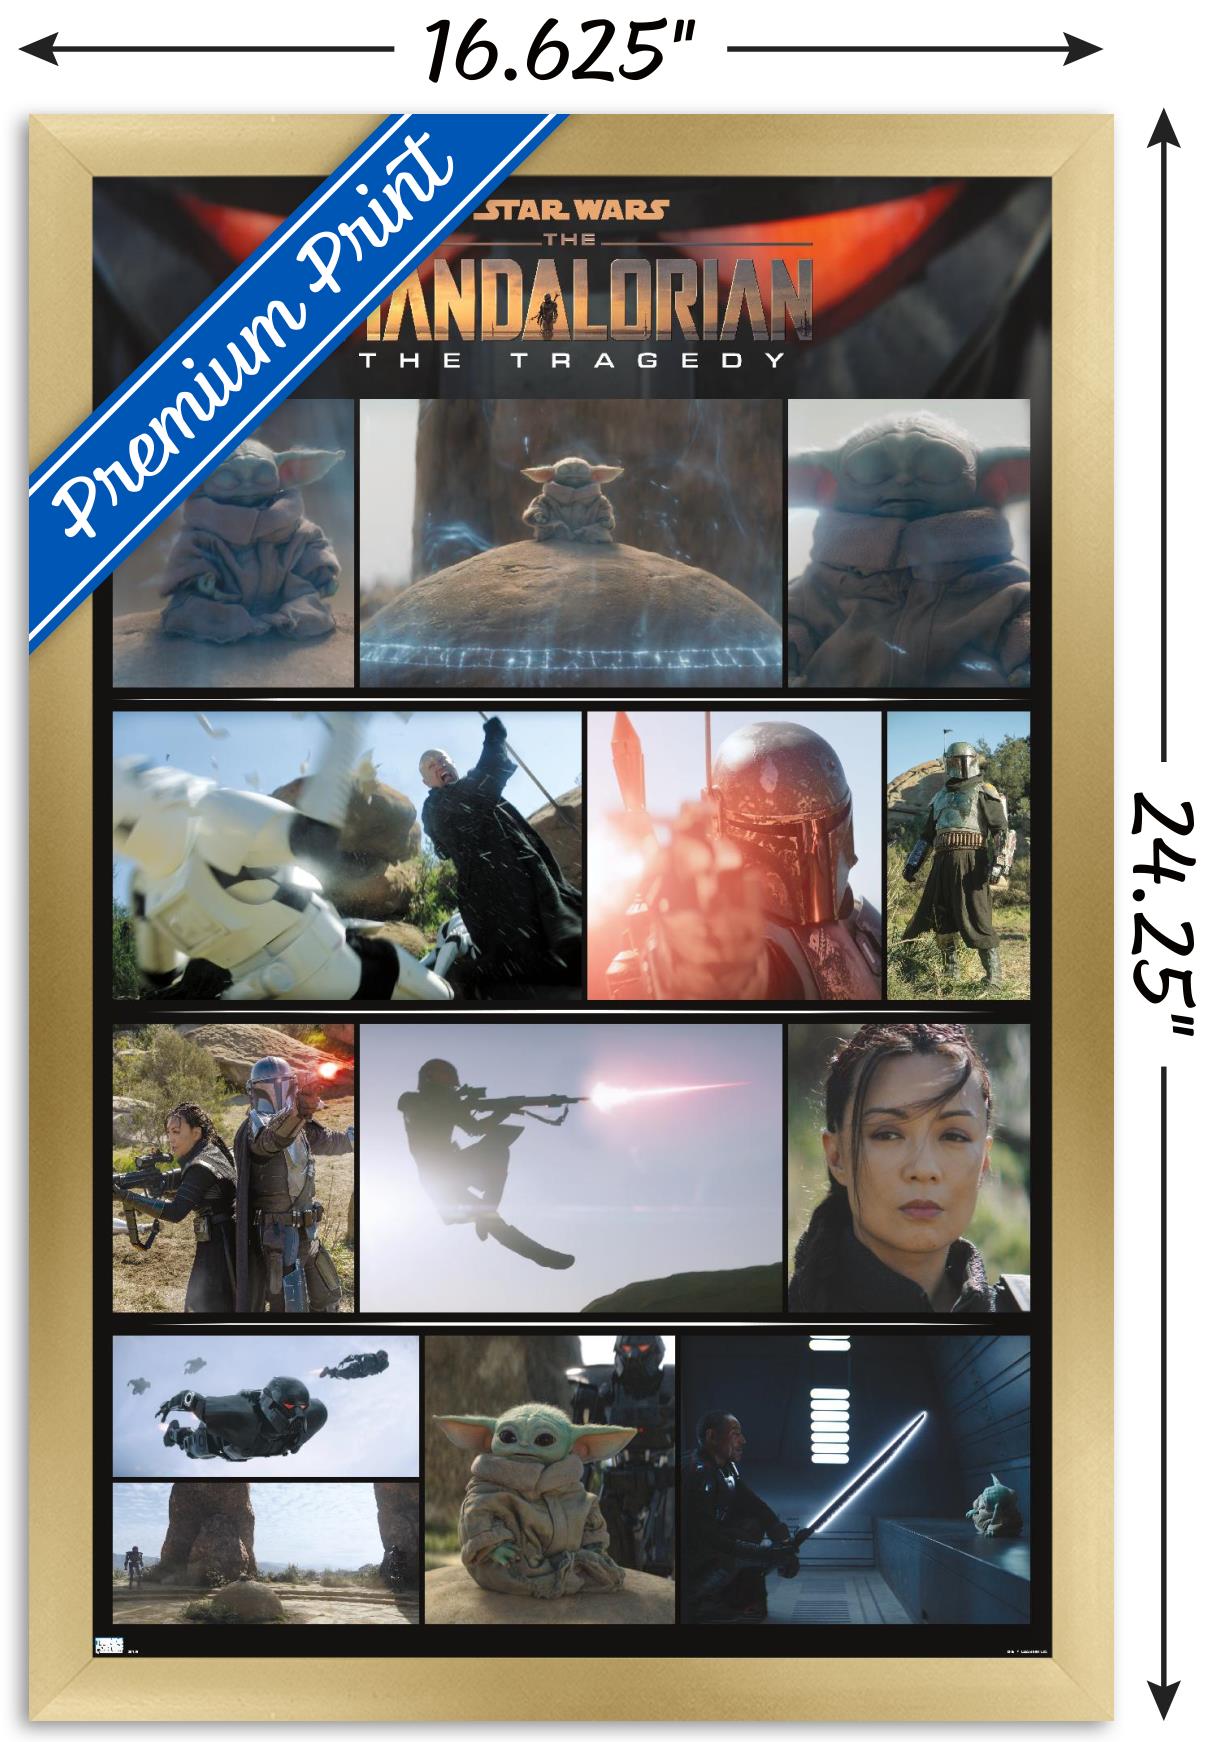 Star Wars: The Mandalorian Season 2 - Chapter 14 Grid Wall Poster, 14.725" x 22.375", Framed - image 3 of 5